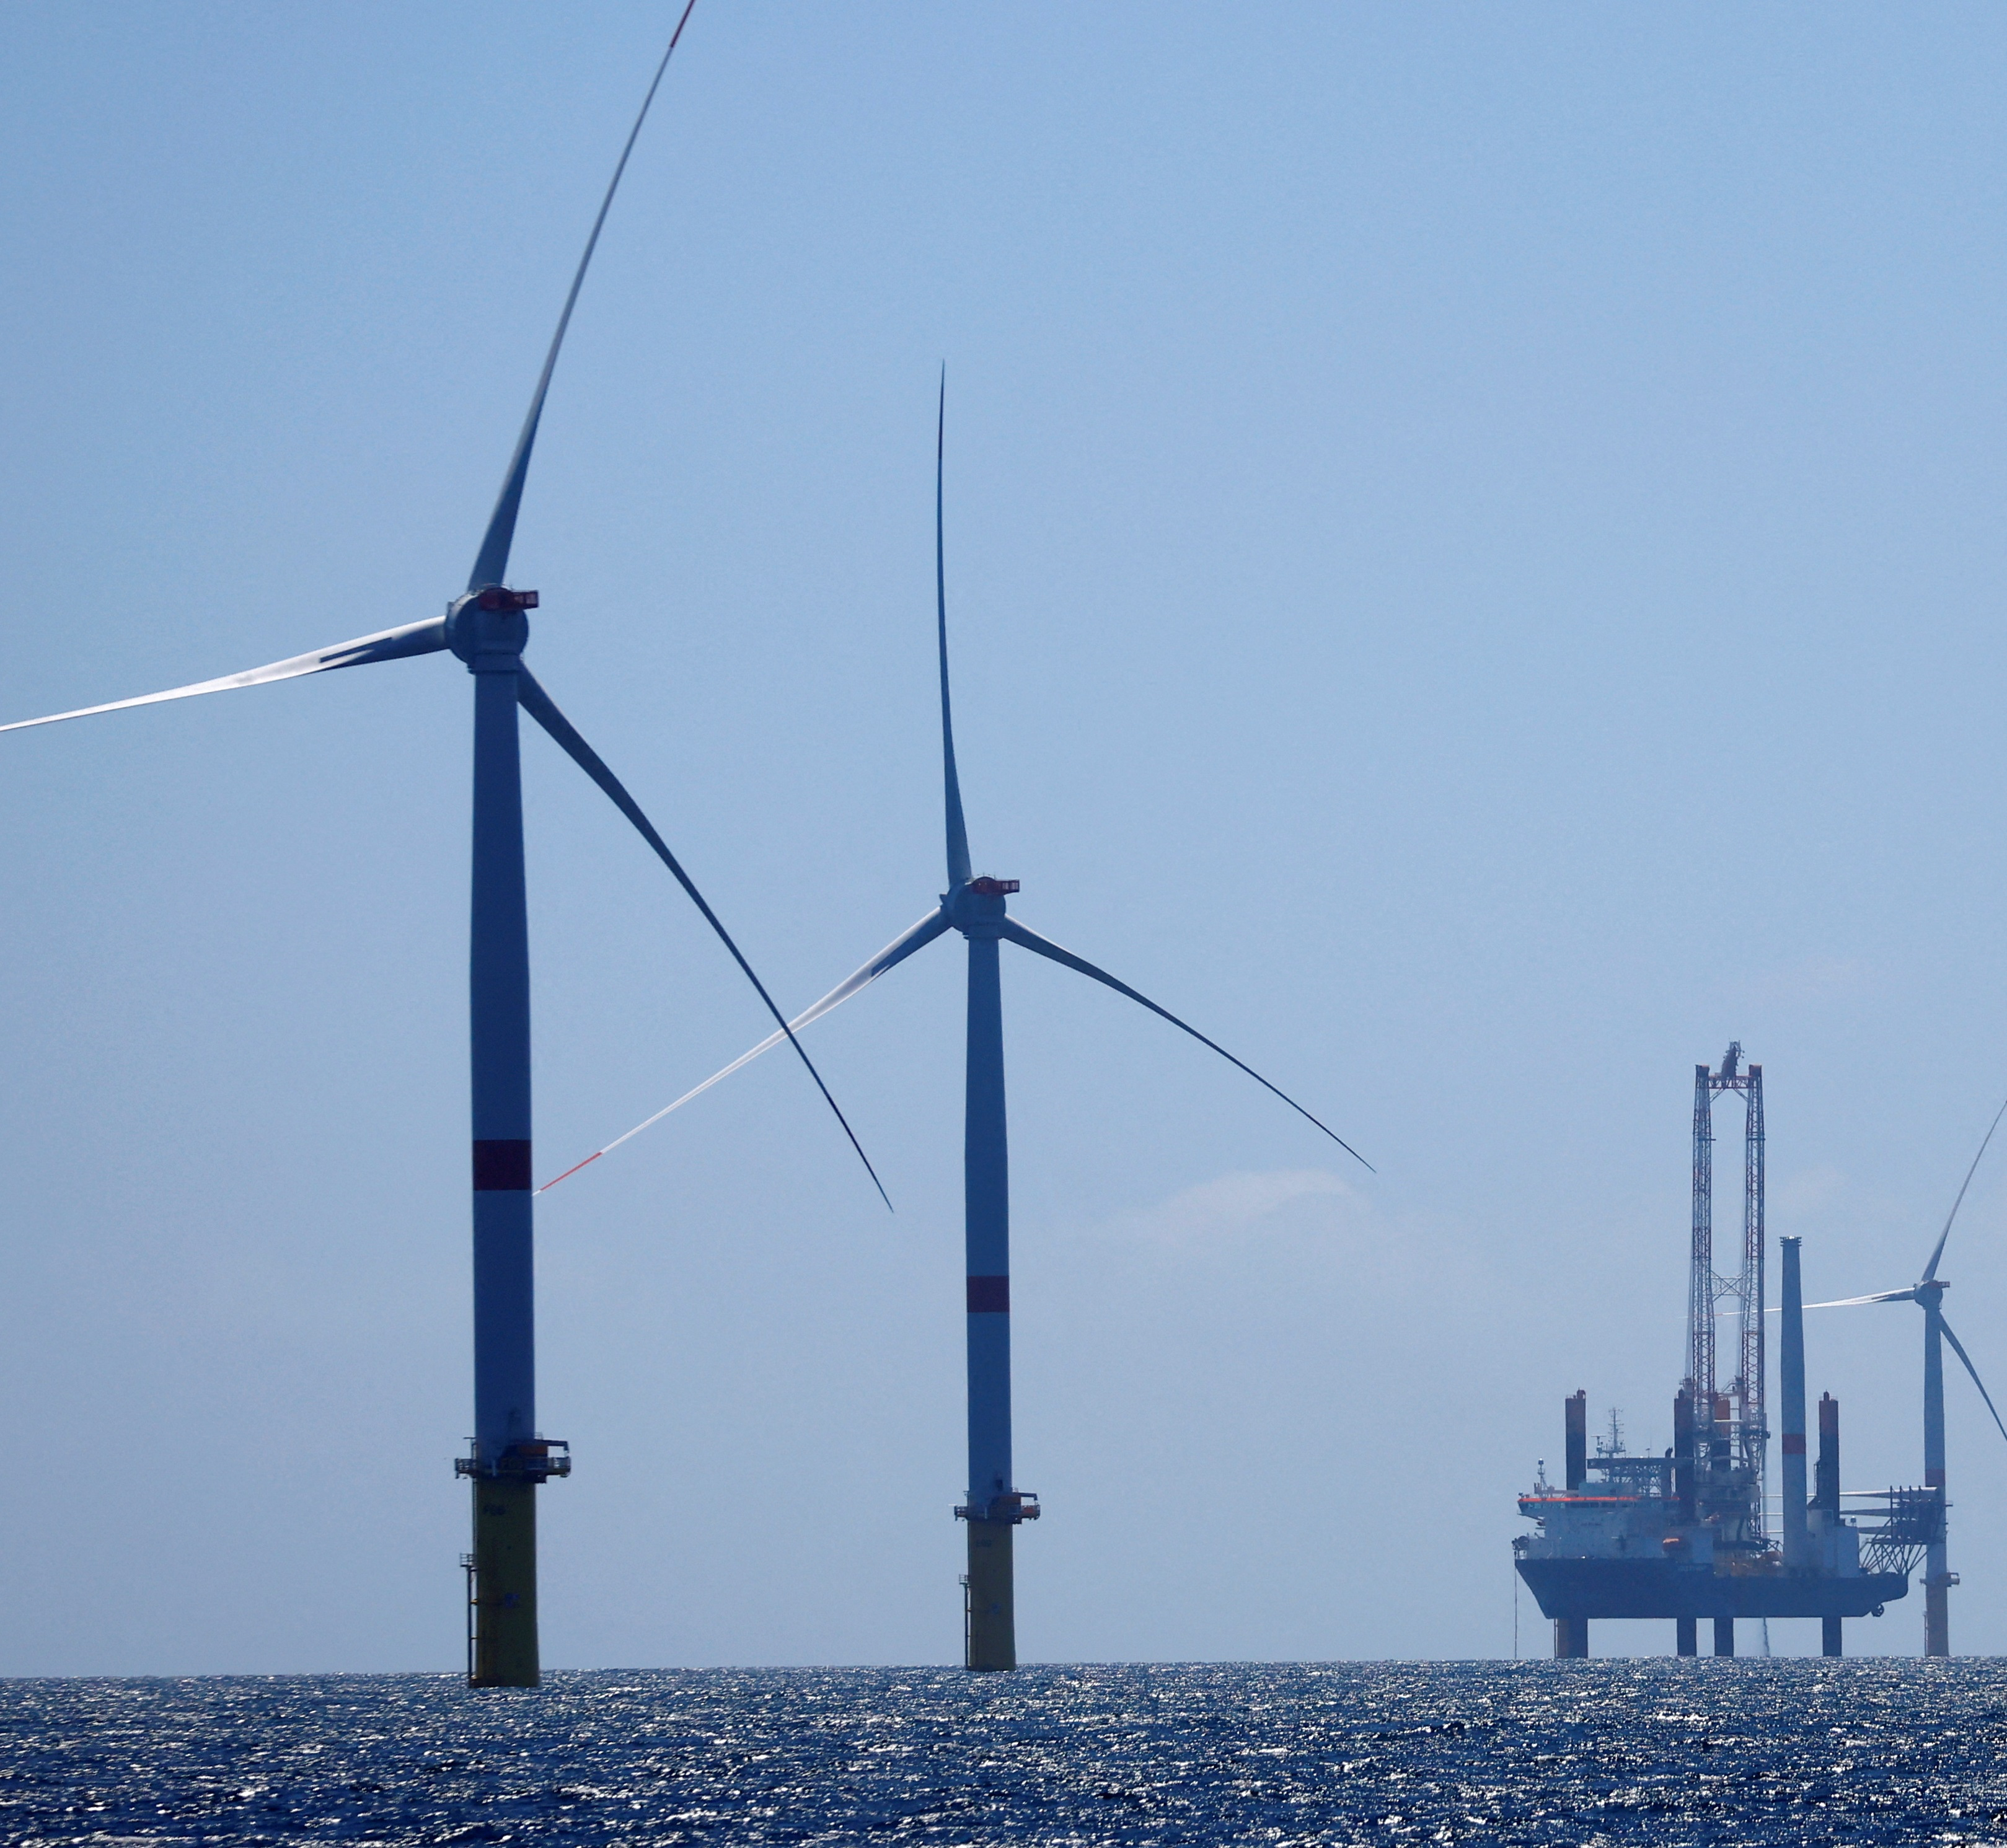 Developers fear a lack of support could damage the UK's leading position in offshore wind.